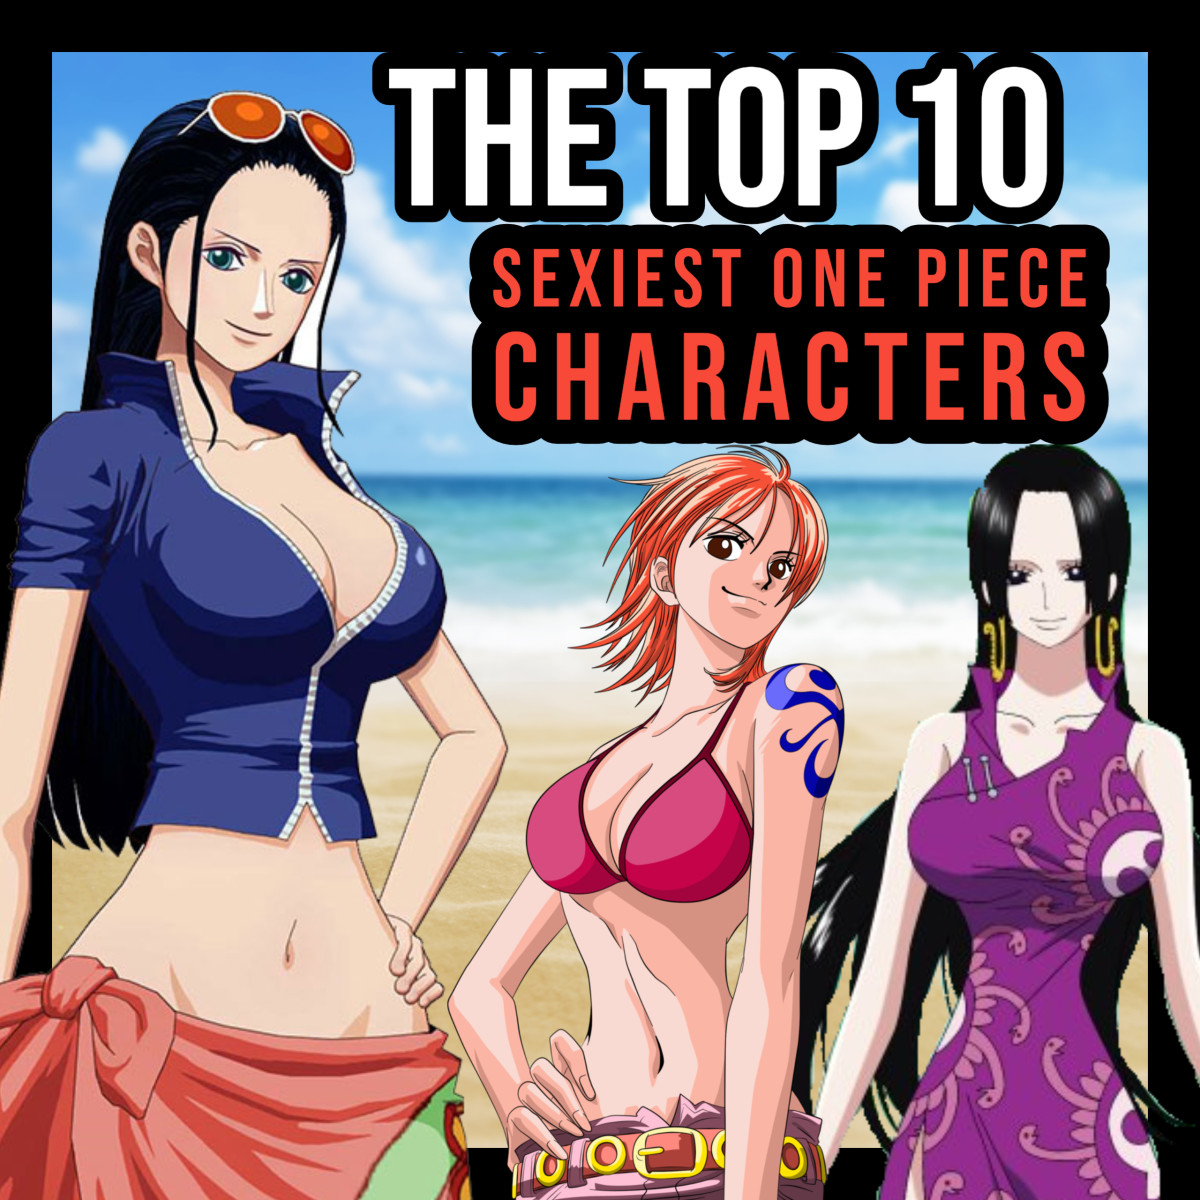 From Jewelry Bonney to Boa Hancock, this article ranks the 10 sexiest "One Piece" characters of all time!